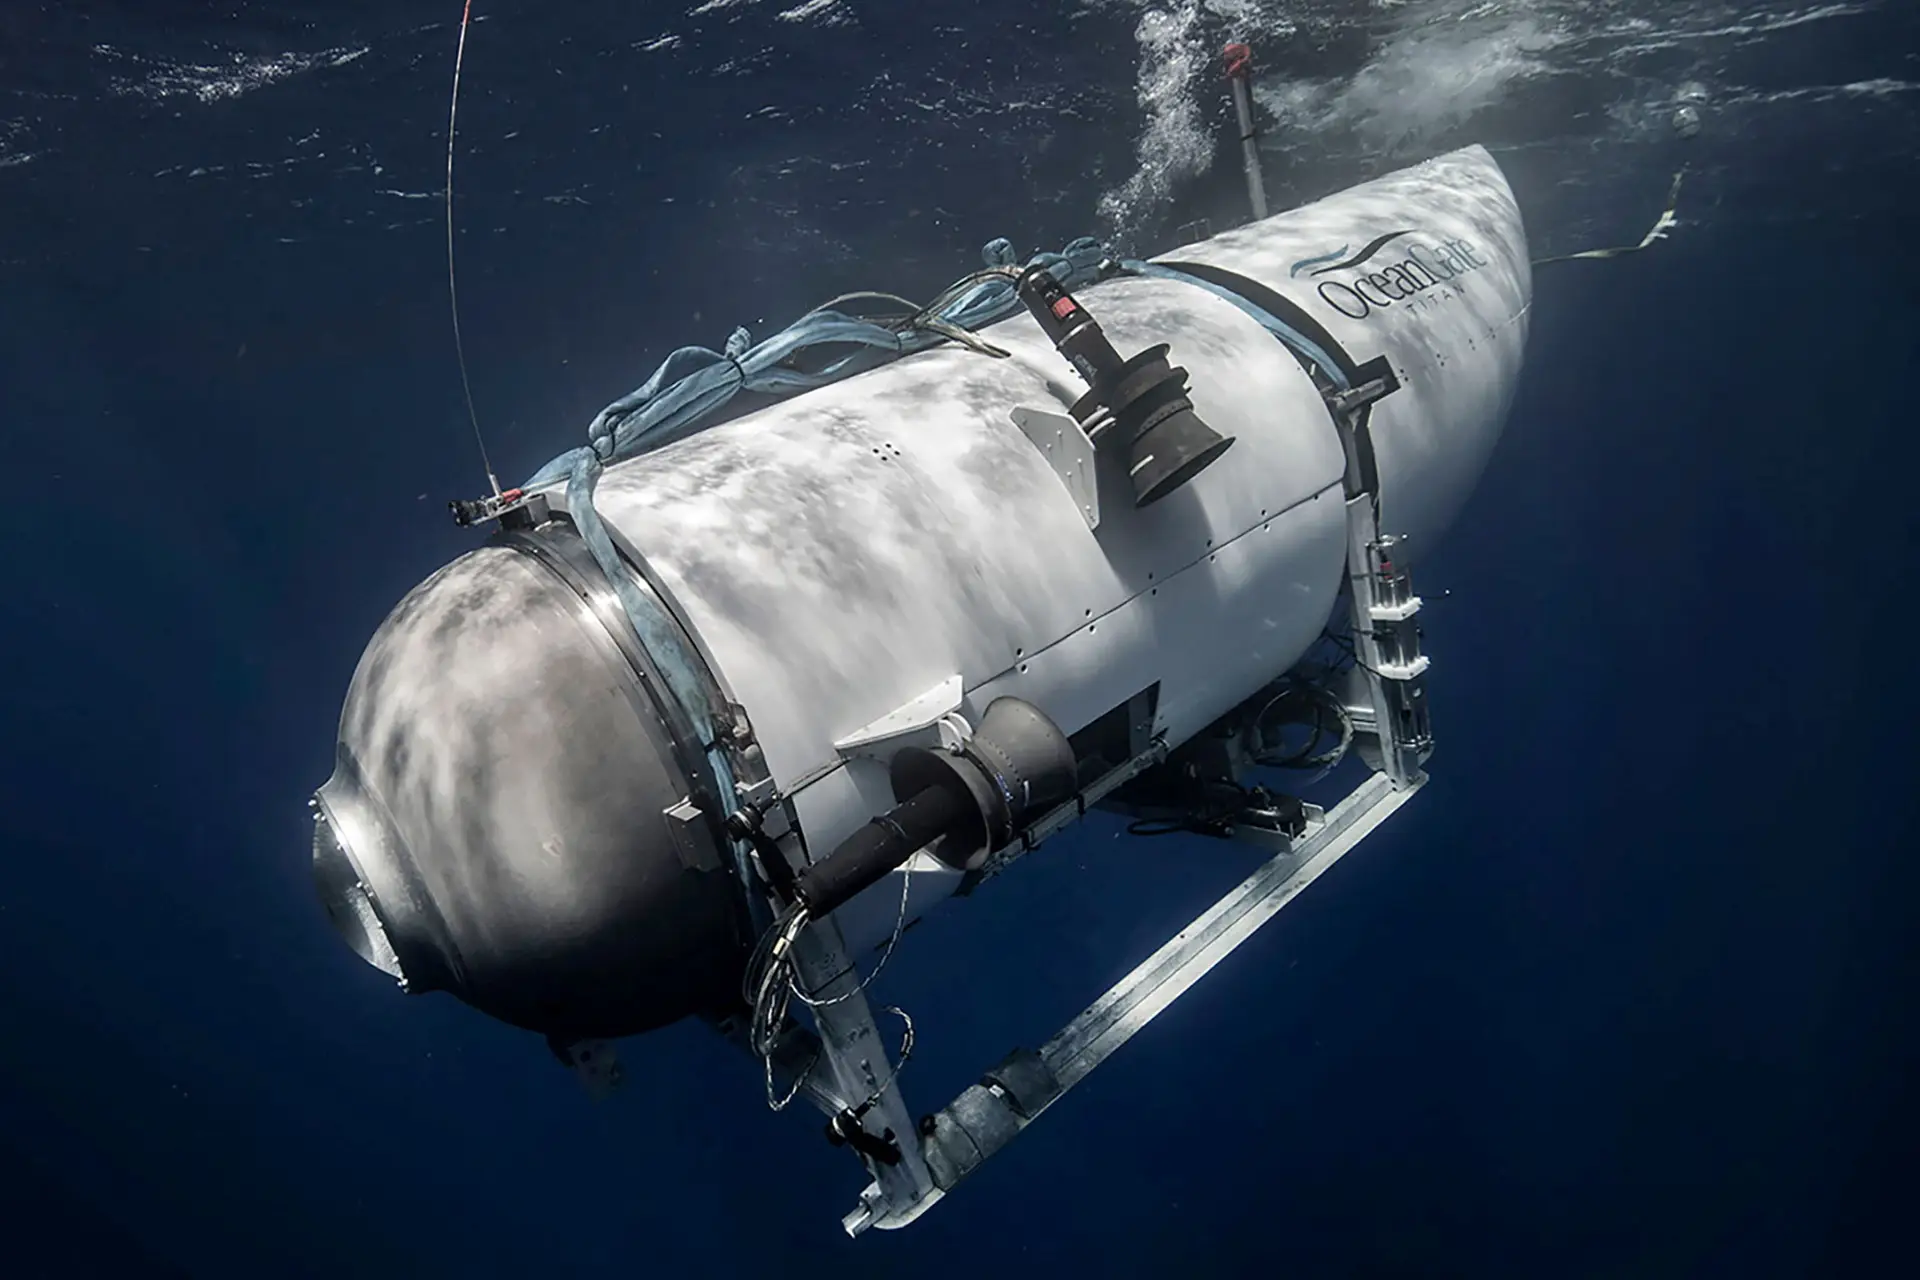 Study Reveals that Passengers on the Titan Submersible Were Informed of Implosion Seconds Before the Accident